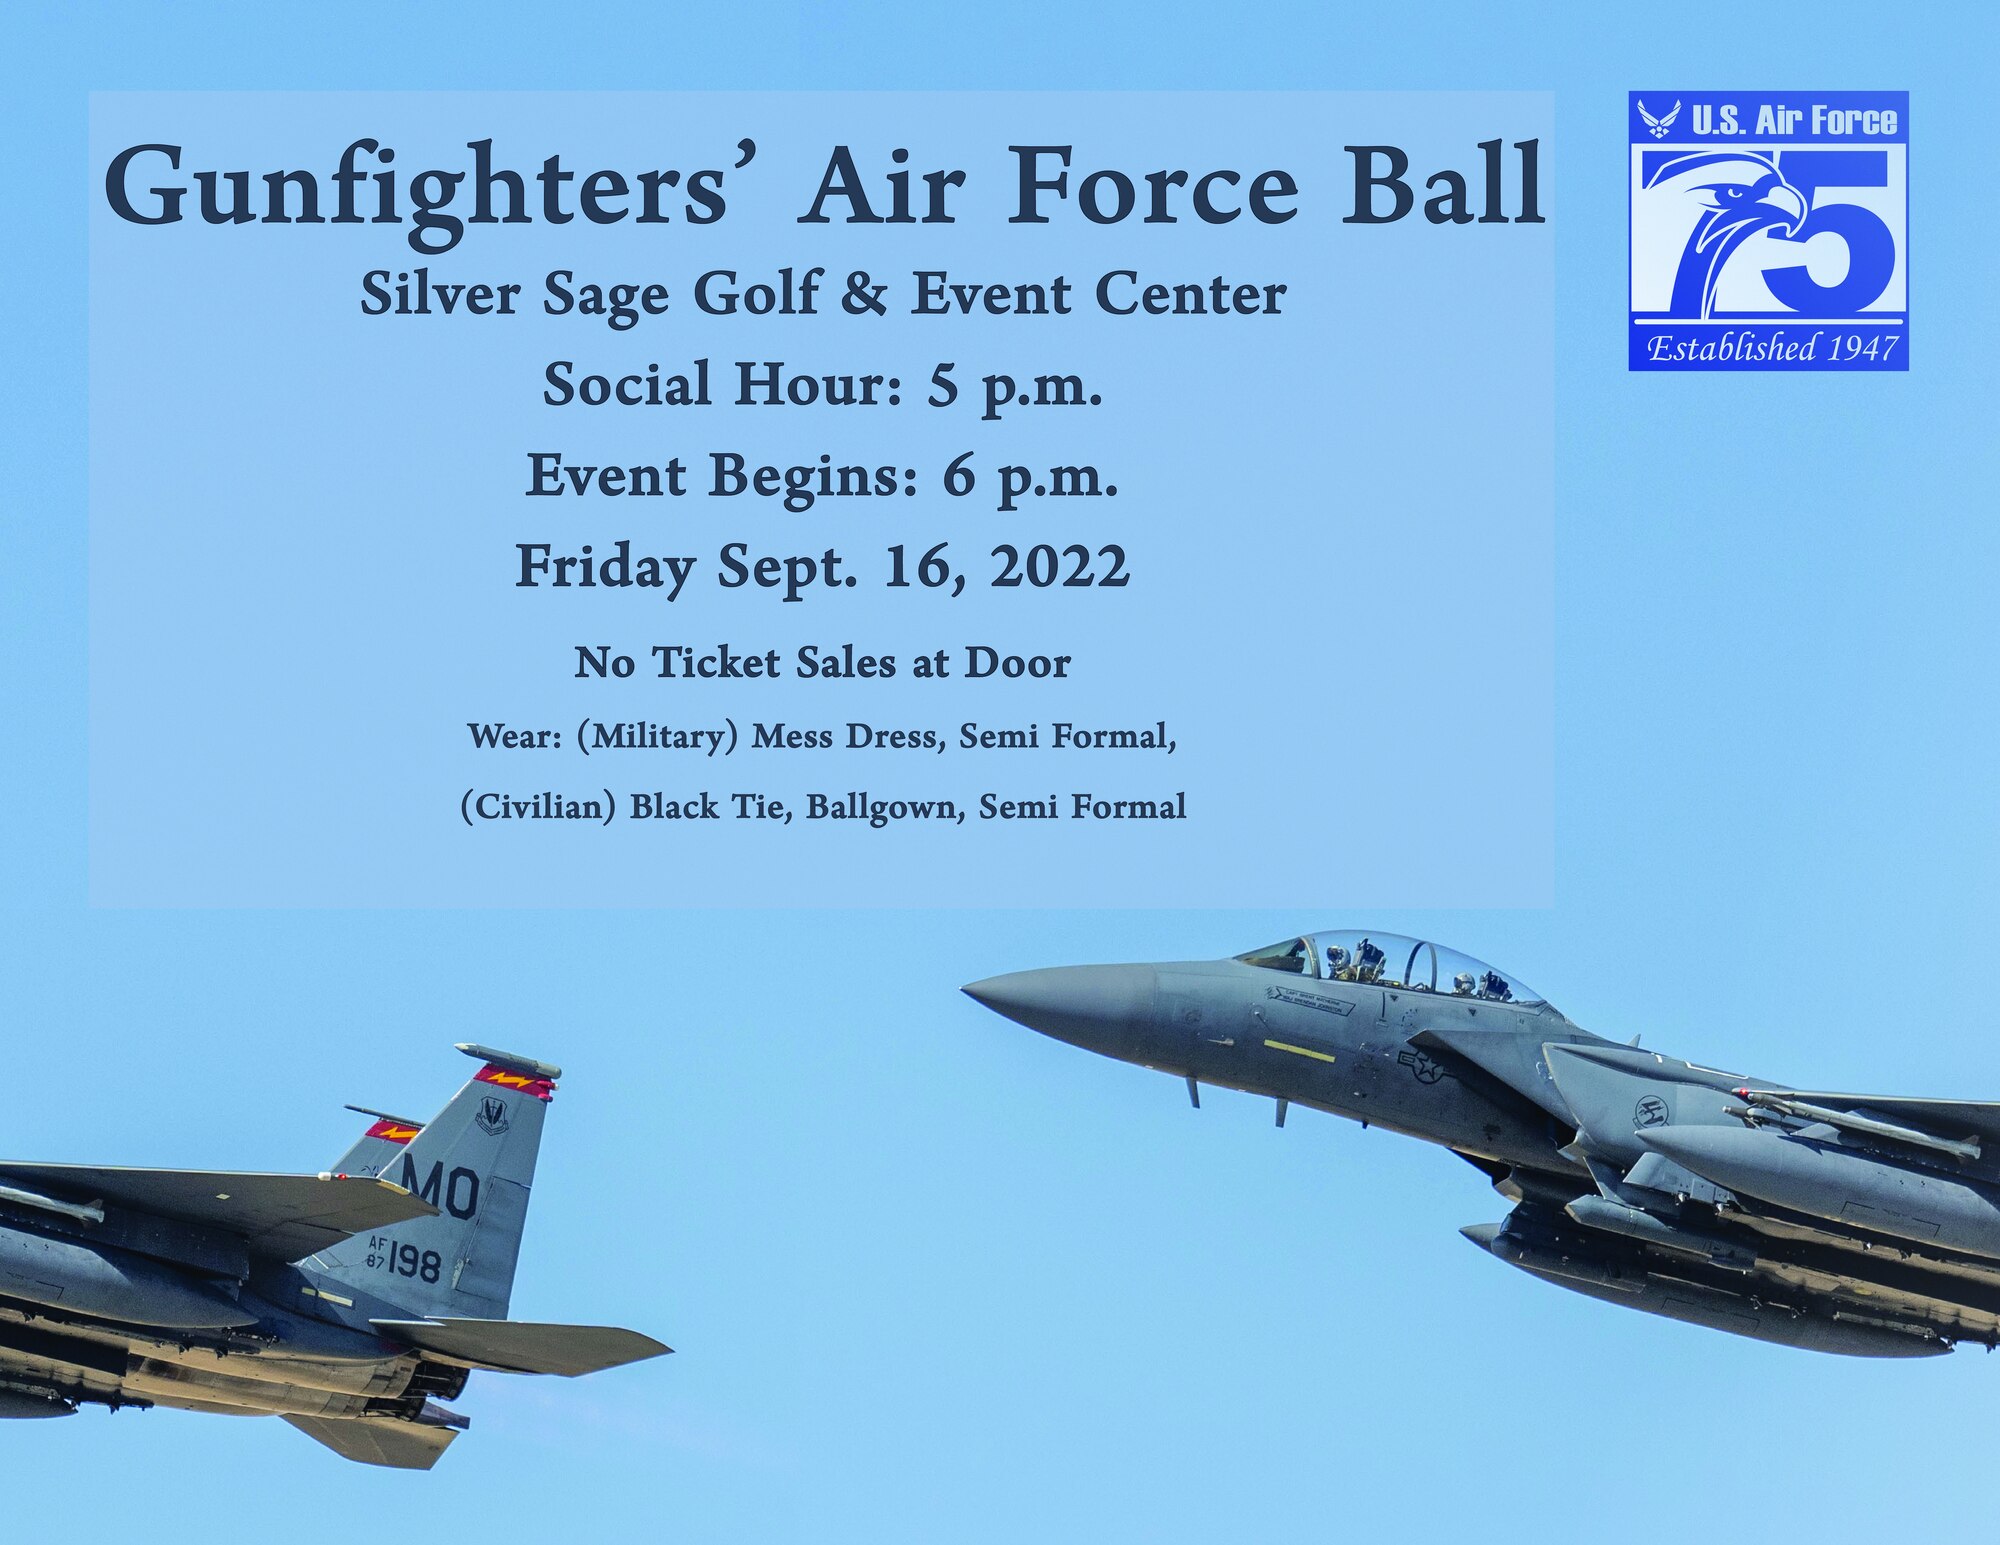 Gunfighters' Air Force Ball: Held at Mountain Home Air Force Base, Idaho, Silver Sage Golf and Event Center, social hour at 5 p.m., event to begin at 6 p.m. on Friday Sept. 16, 2022. No ticket sales, must RSVP through invitation. Military members must wear mess dress or semi formal, and civilians must wear black tie attire, ball gown, or semi formal.